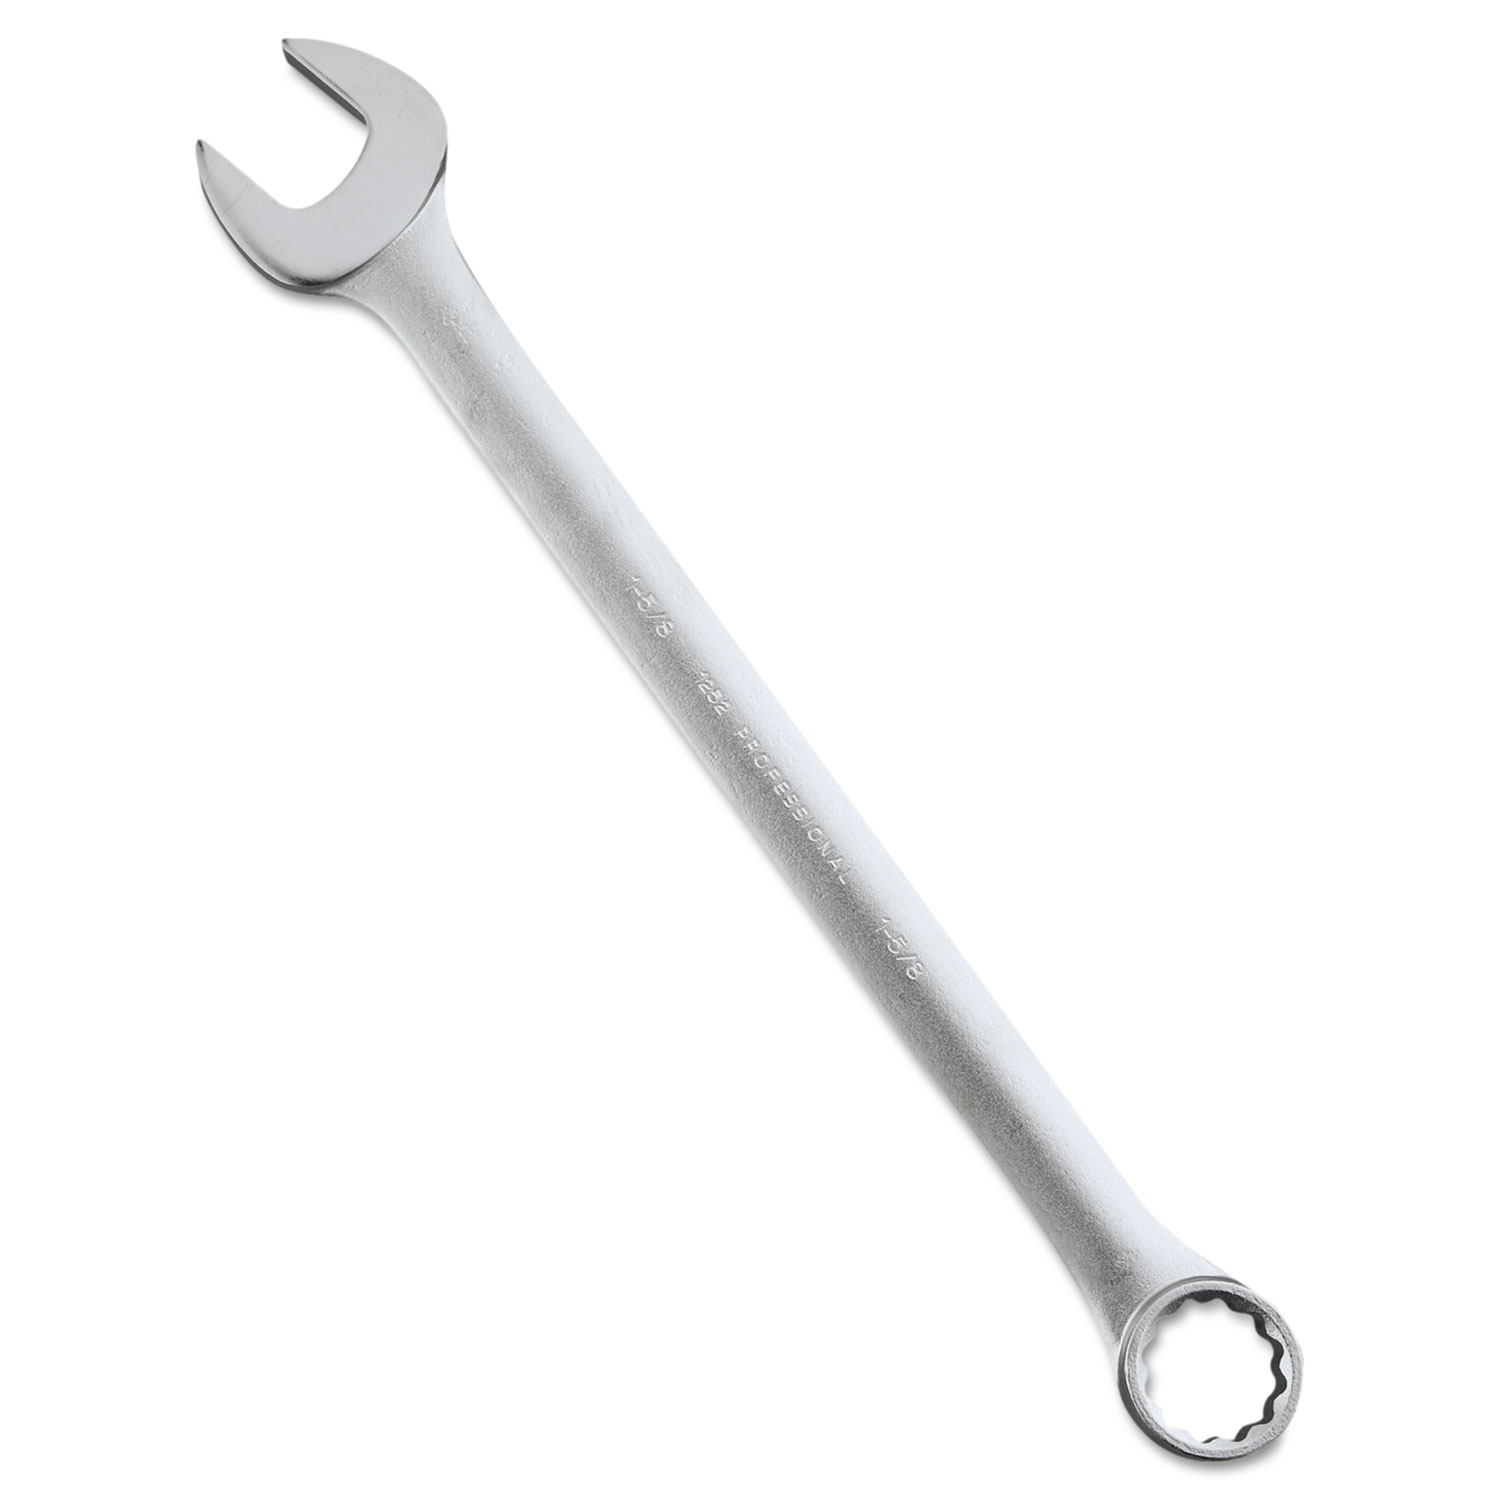 PROTO Combination Wrench, 23 Long, 1 5/8 Opening, 12-Point Box